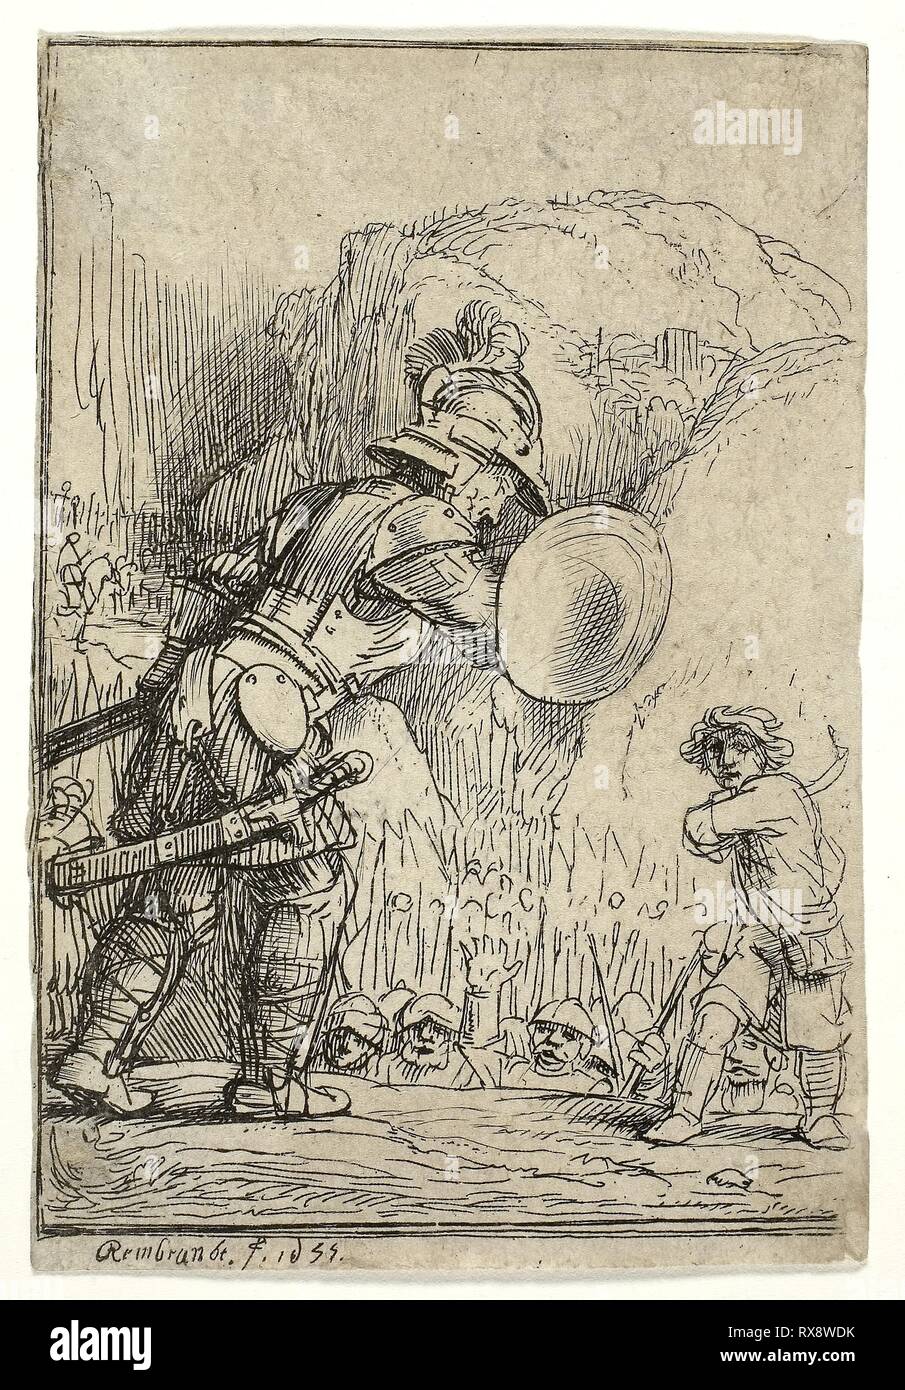 David and Goliath. Rembrandt van Rijn; Dutch, 1606-1669. Date: 1655. Dimensions: 108 x 73 mm (image); 111 x 75 mm (sheet). Etching, engraving, and drypoint on paper. Origin: Holland. Museum: The Chicago Art Institute. Author: REMBRANDT HARMENSZOON VAN RIJN. Rembrandt van Rhijn. Stock Photo